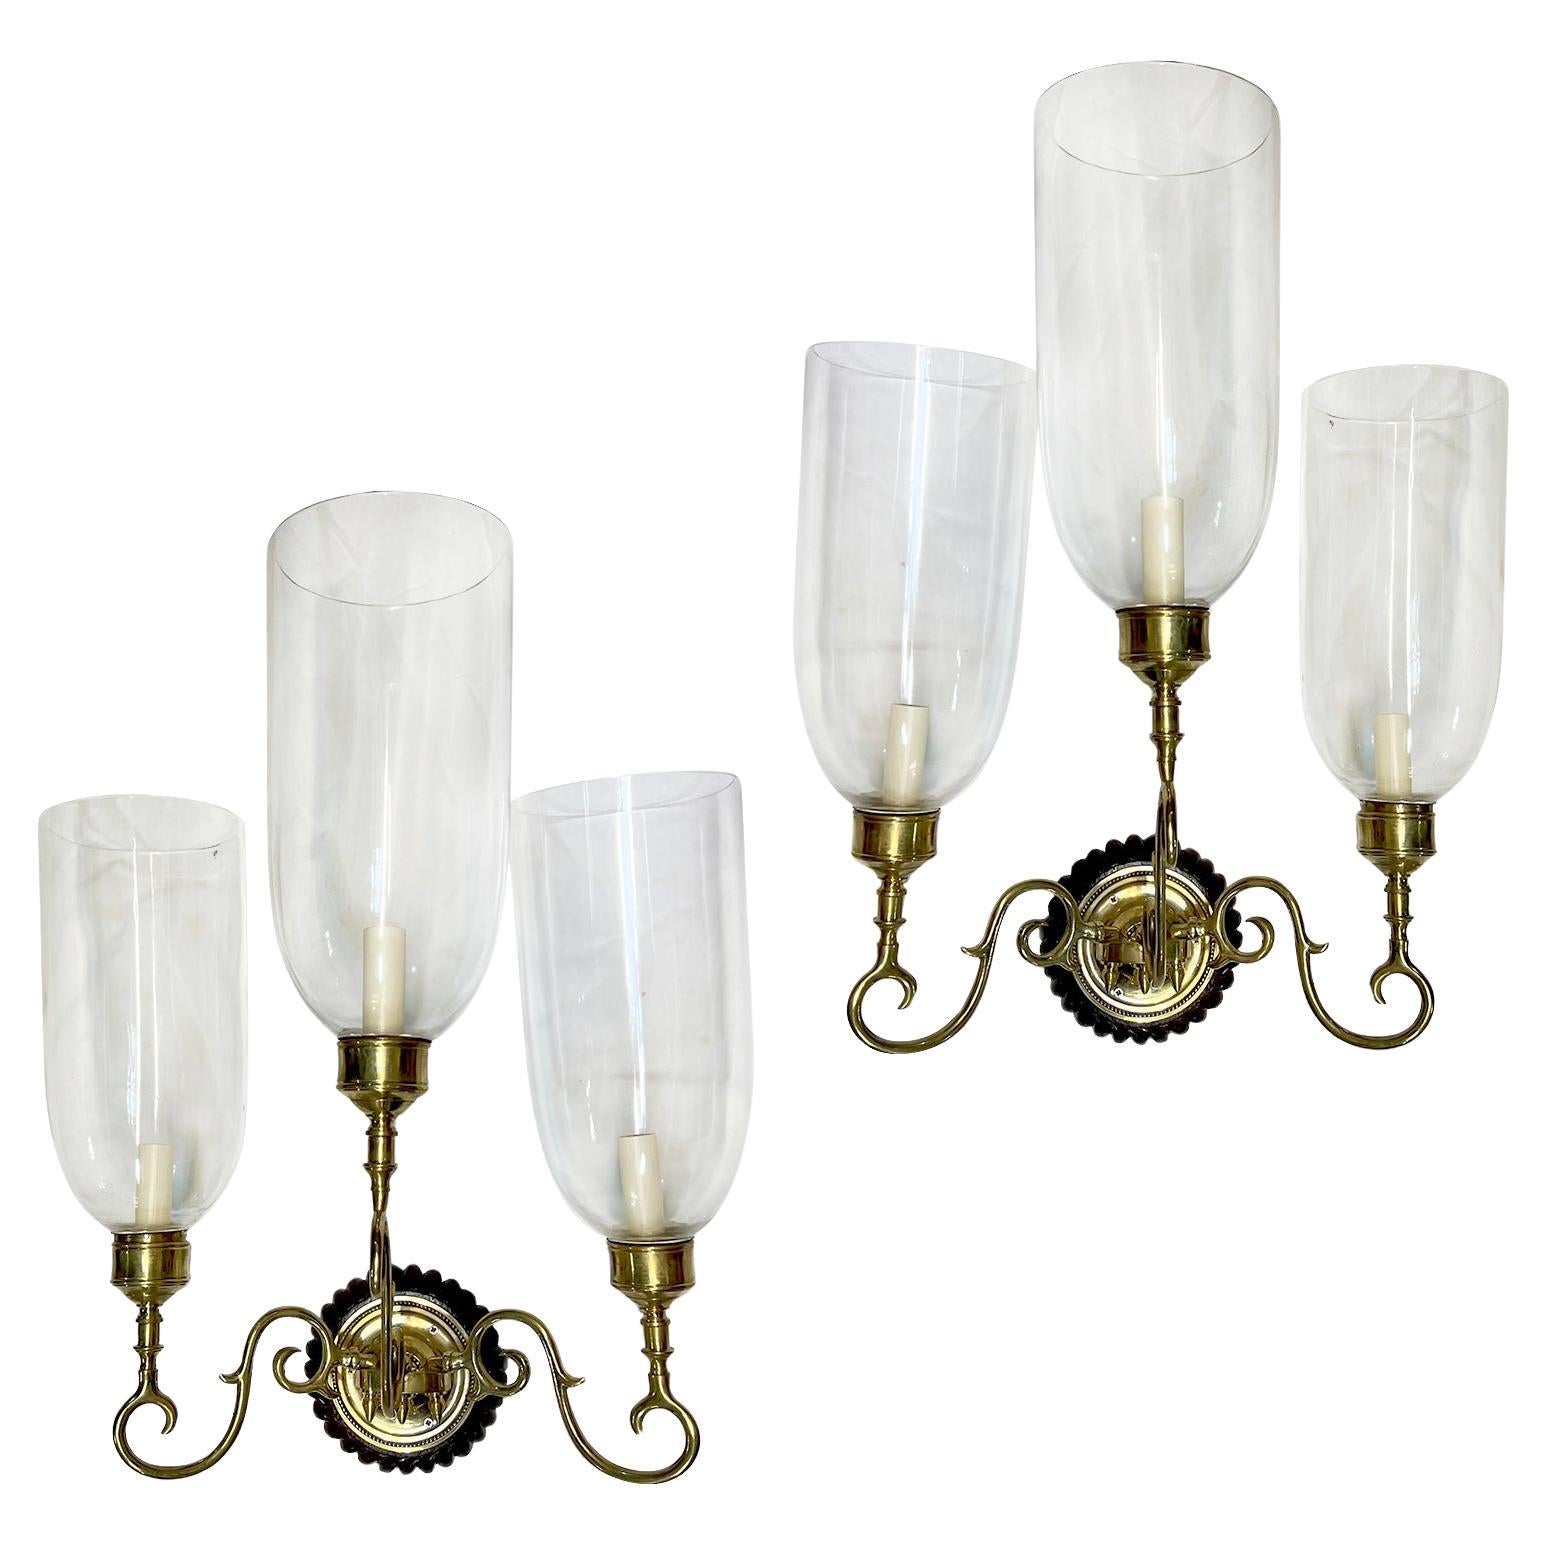 Pair of Large Anglo-Indian Sconces